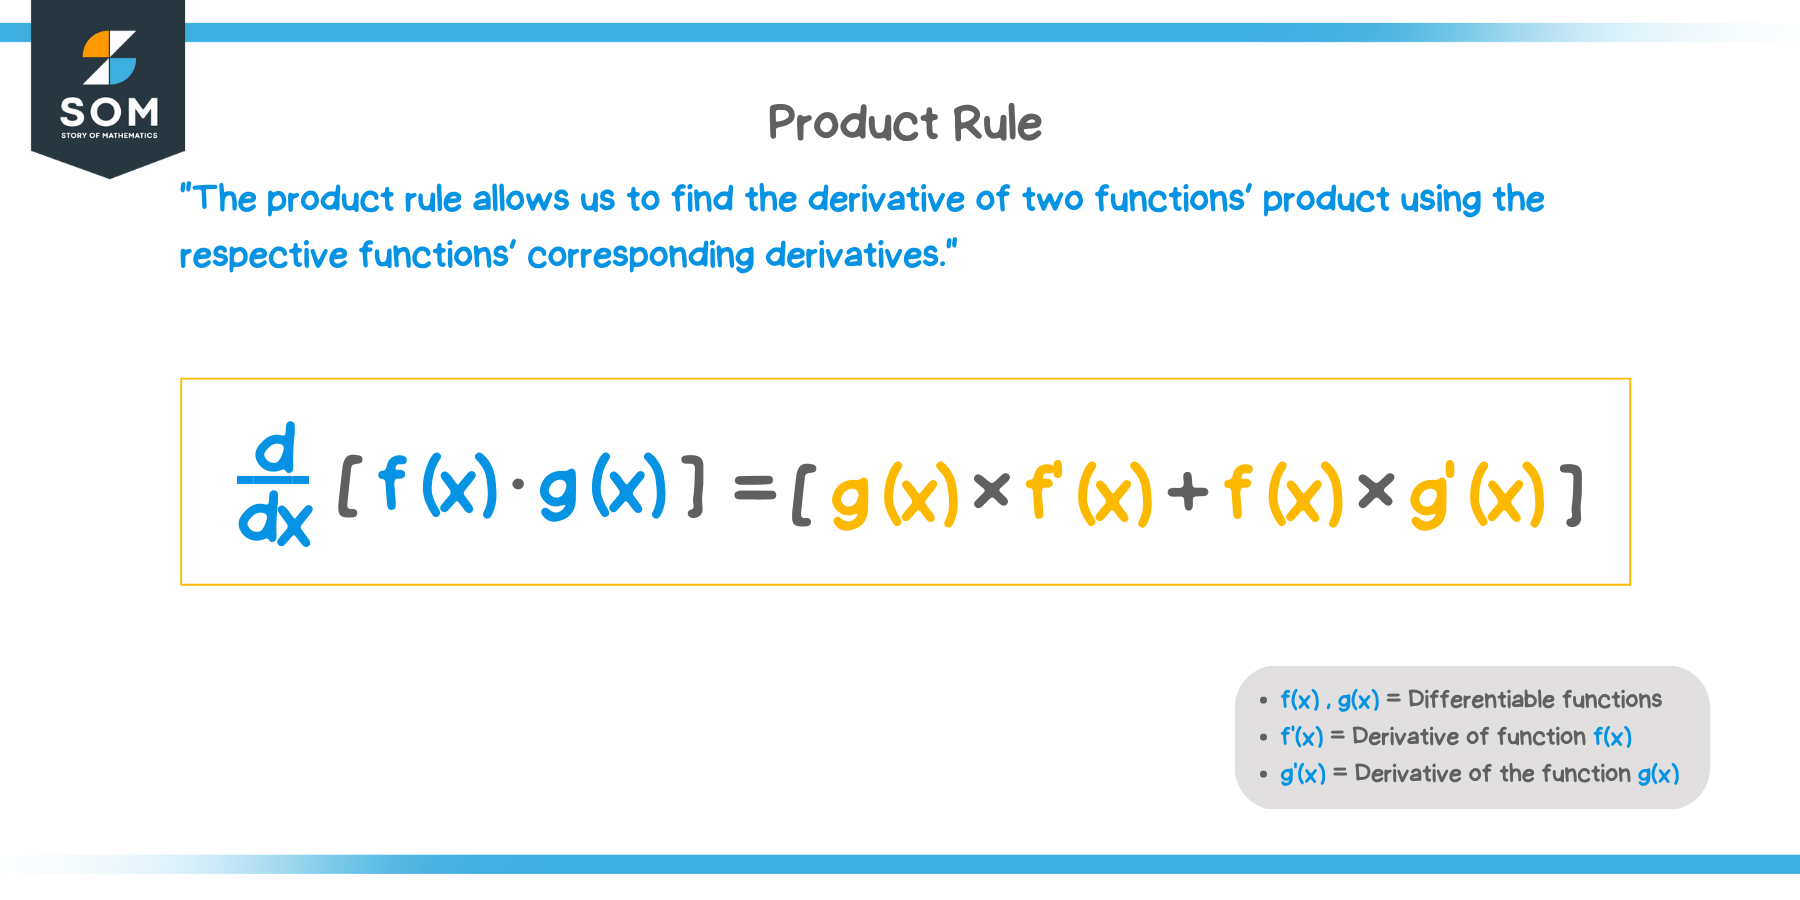 What is the product rule?   